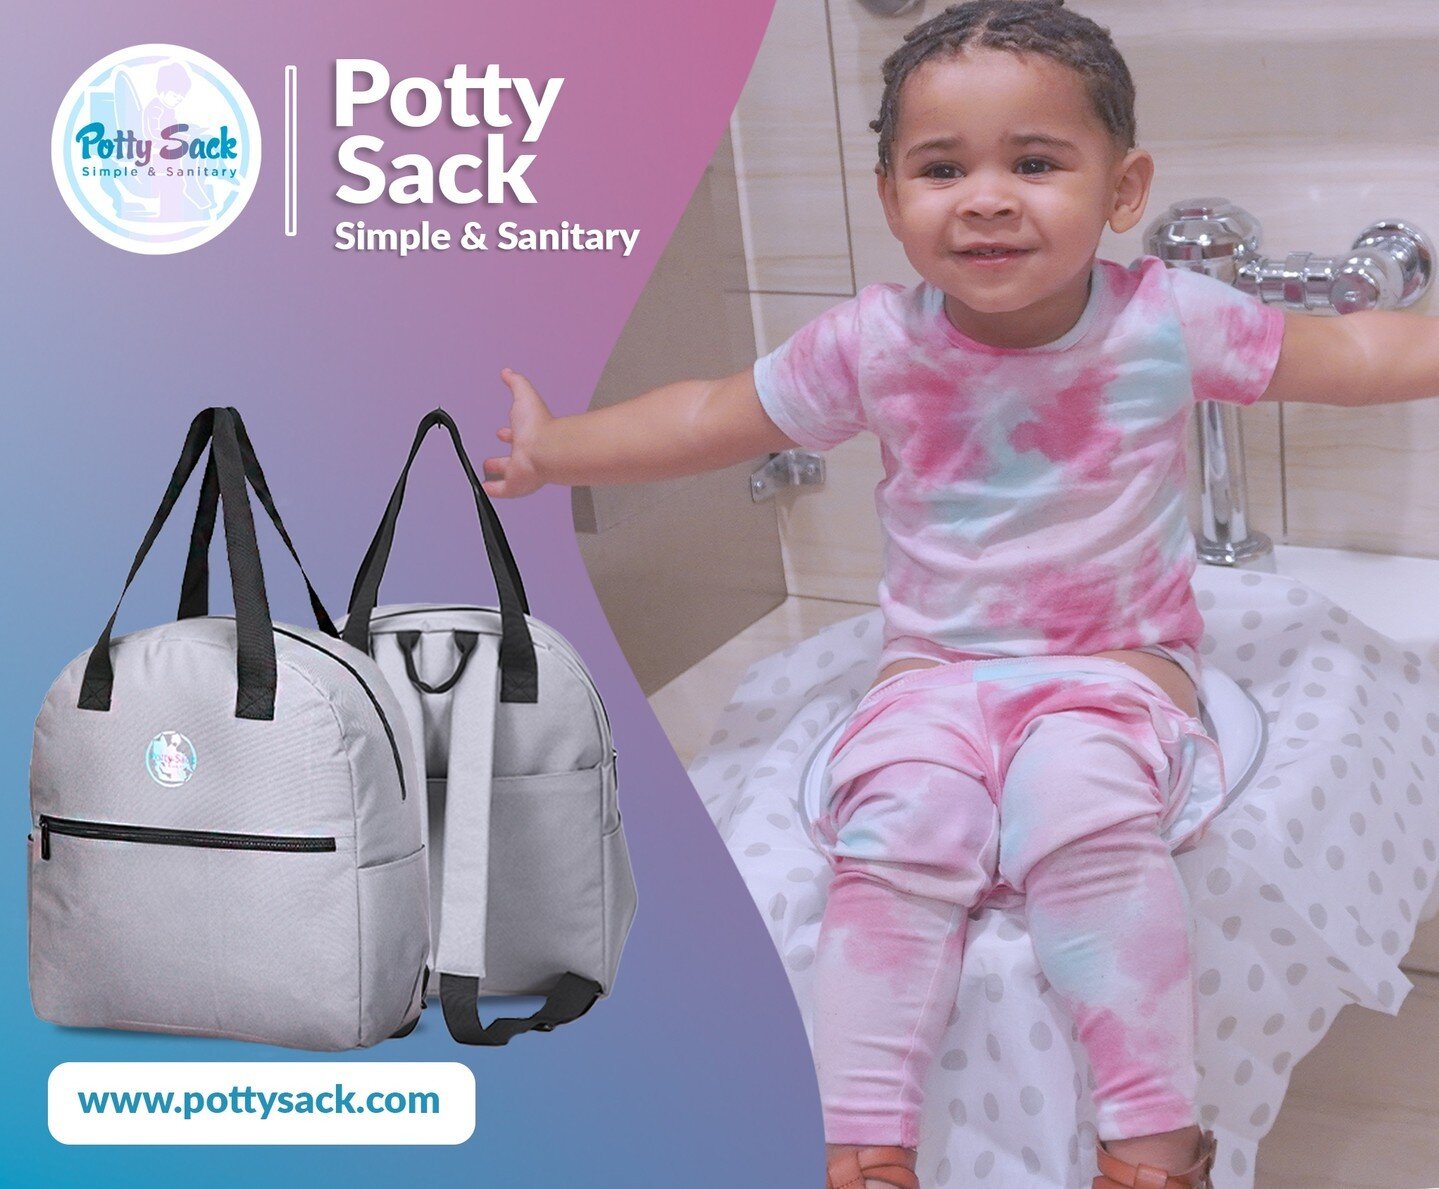 Toilet Covers to keep your Toddler from touching the dirty toilet and Potty Sack so your Toddler can sit comfortably.

Check out our Potty Sacks by Clicking the Link in the Bio!